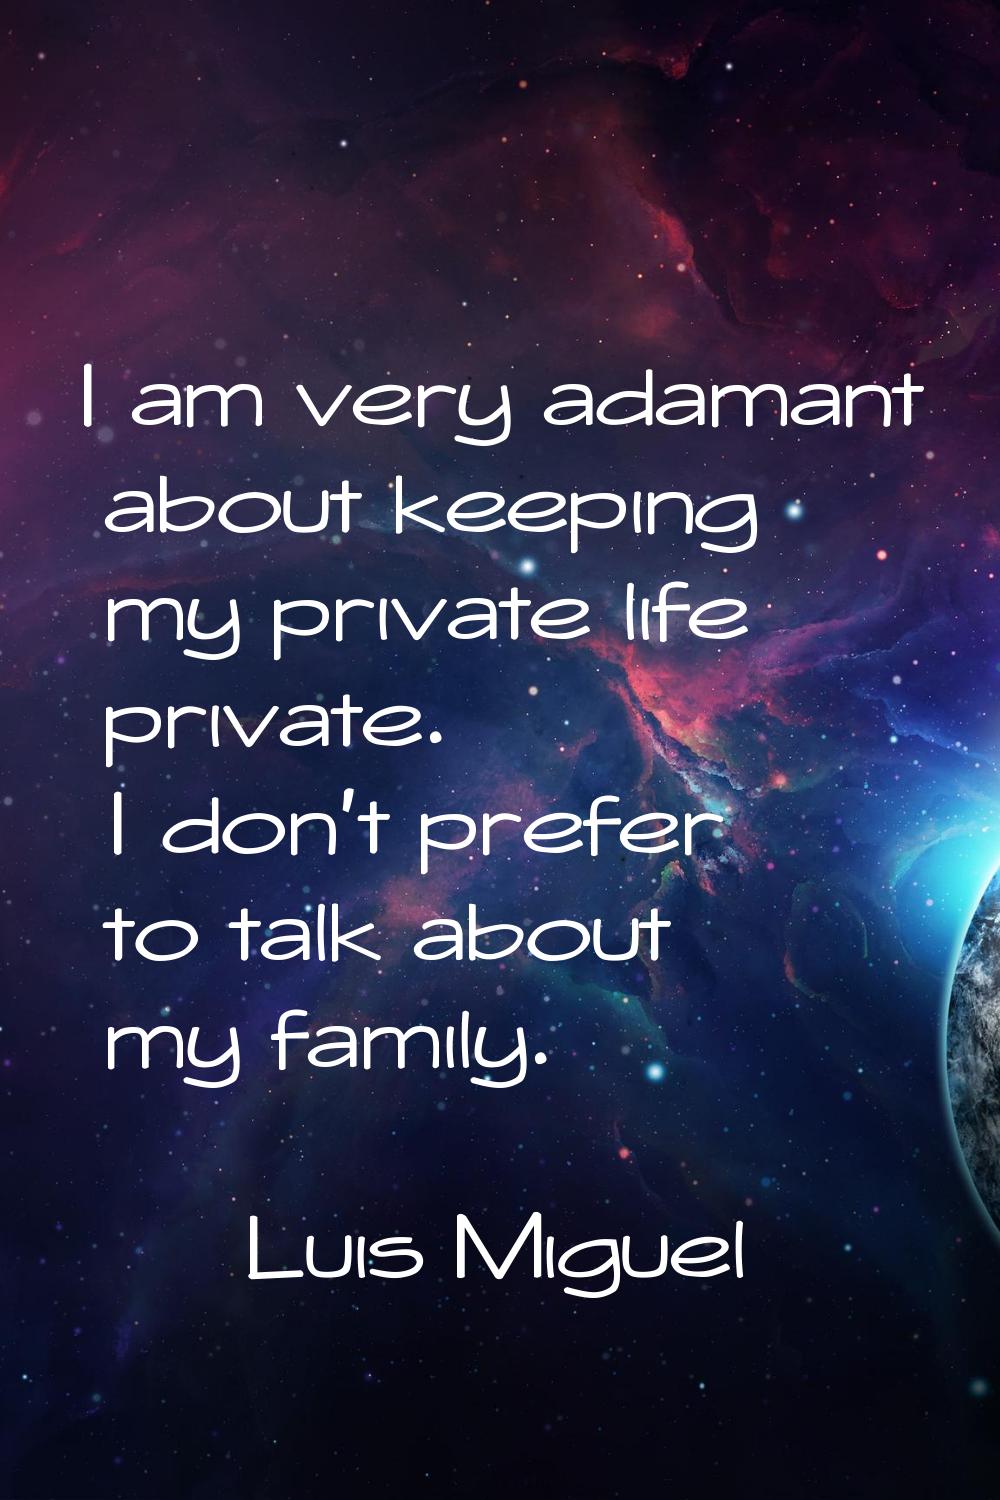 I am very adamant about keeping my private life private. I don't prefer to talk about my family.